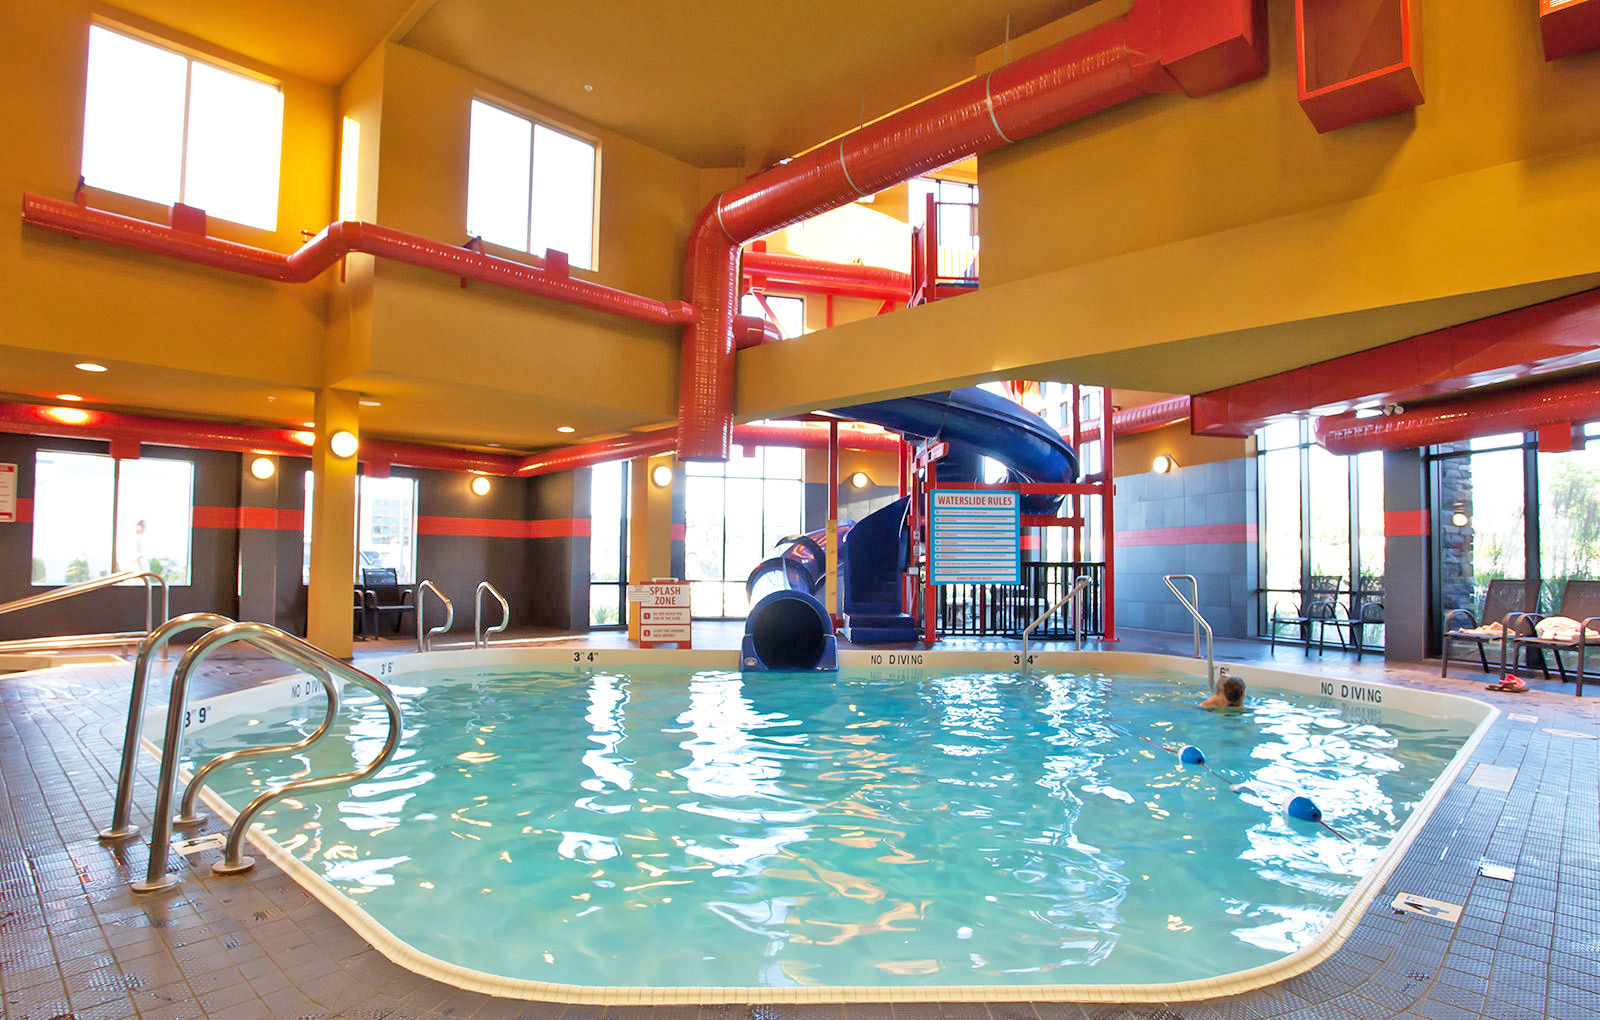 Keep the kids entertained for hours by looking for one of the best hotels in Kelowna with indoor pool and waterslide.